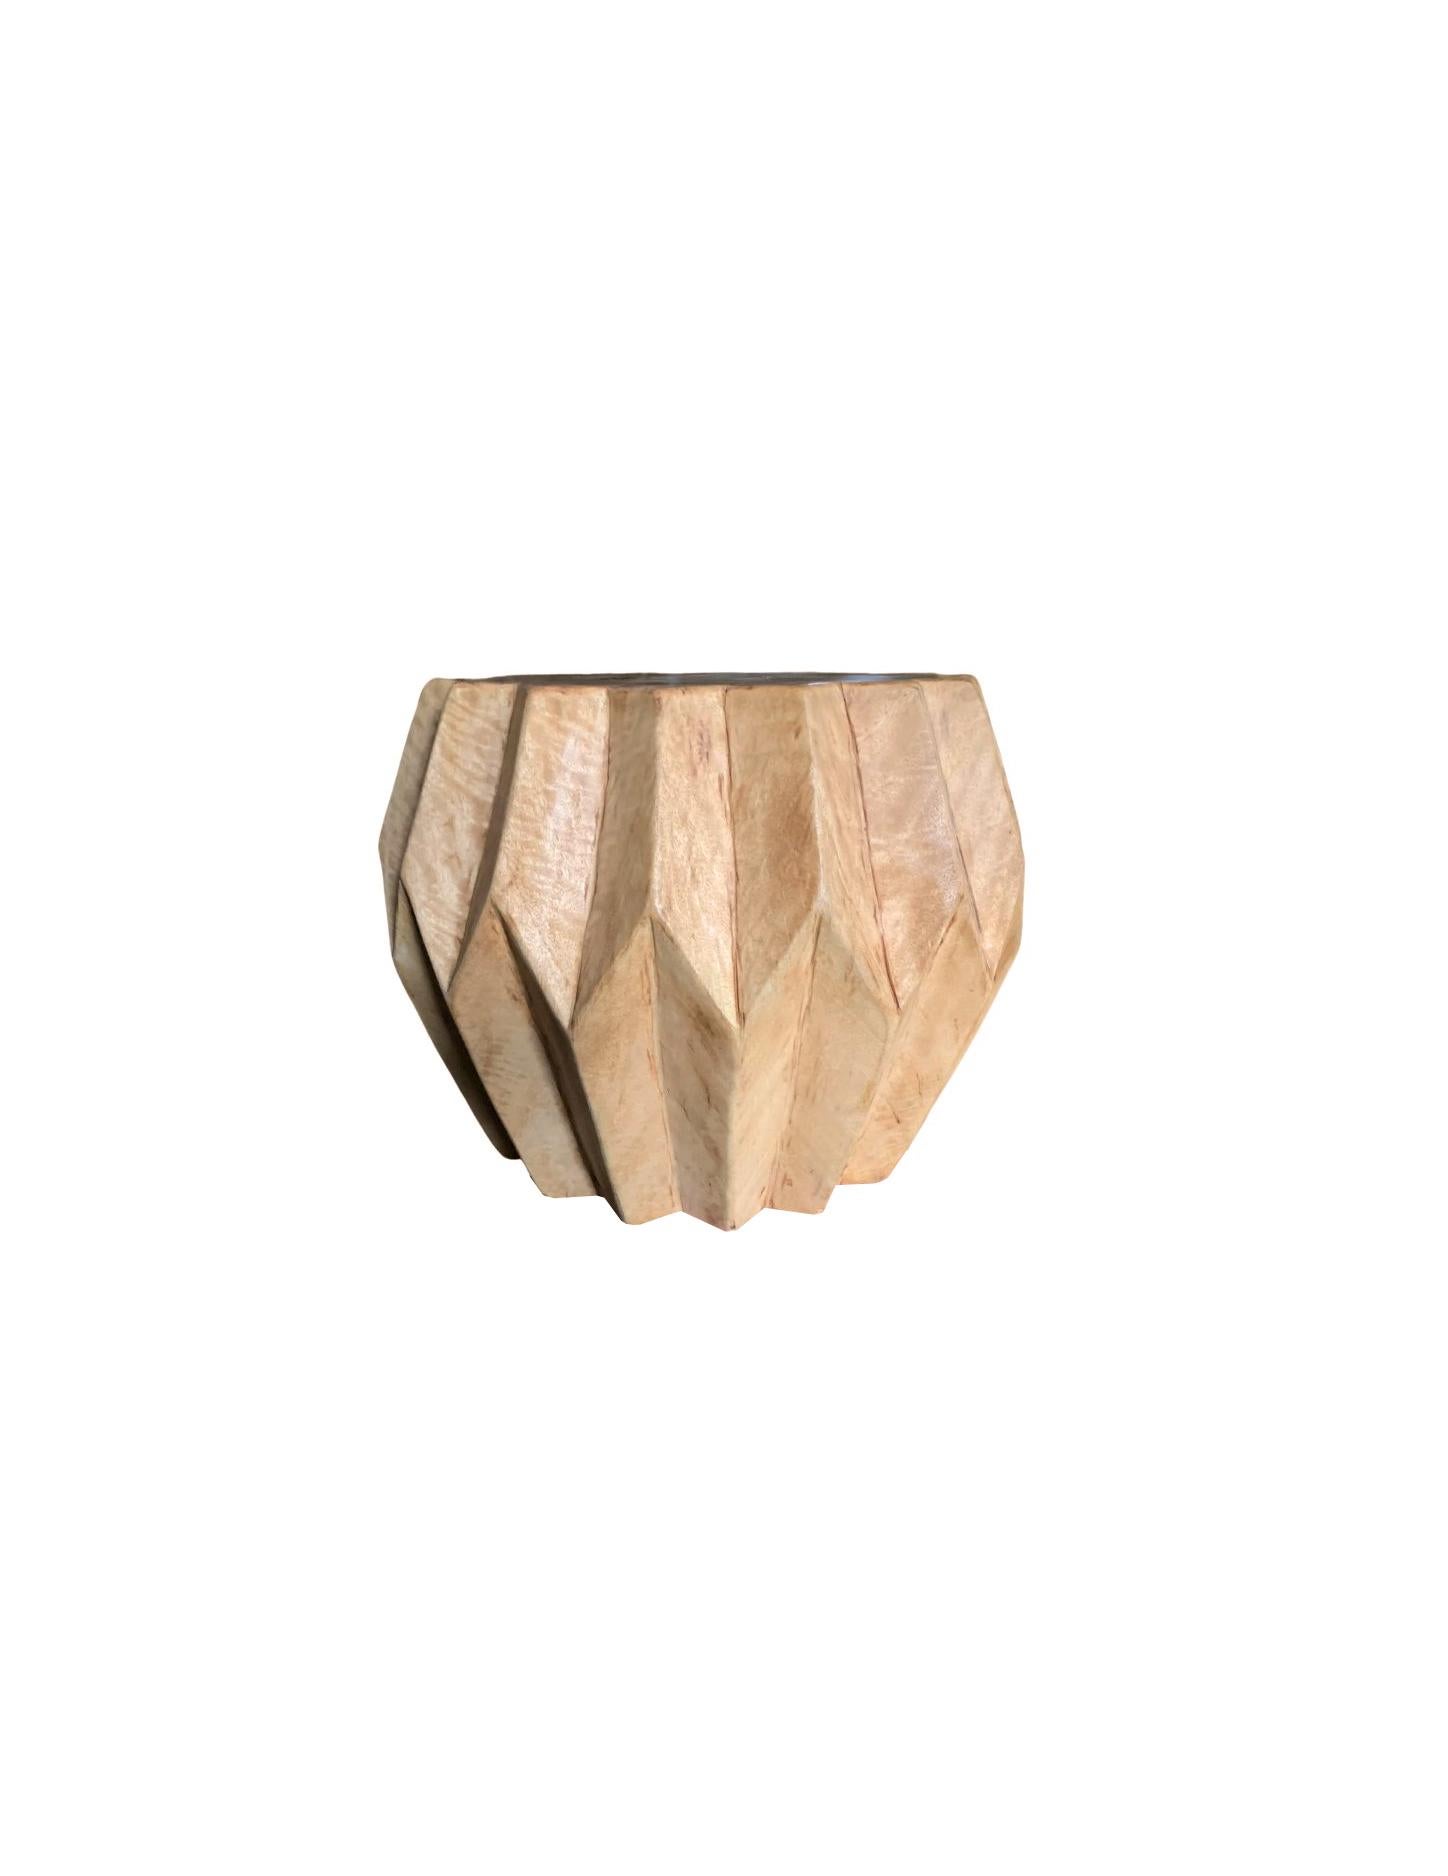 Indonesian Geometric Solid Mango Wood Table For Sale